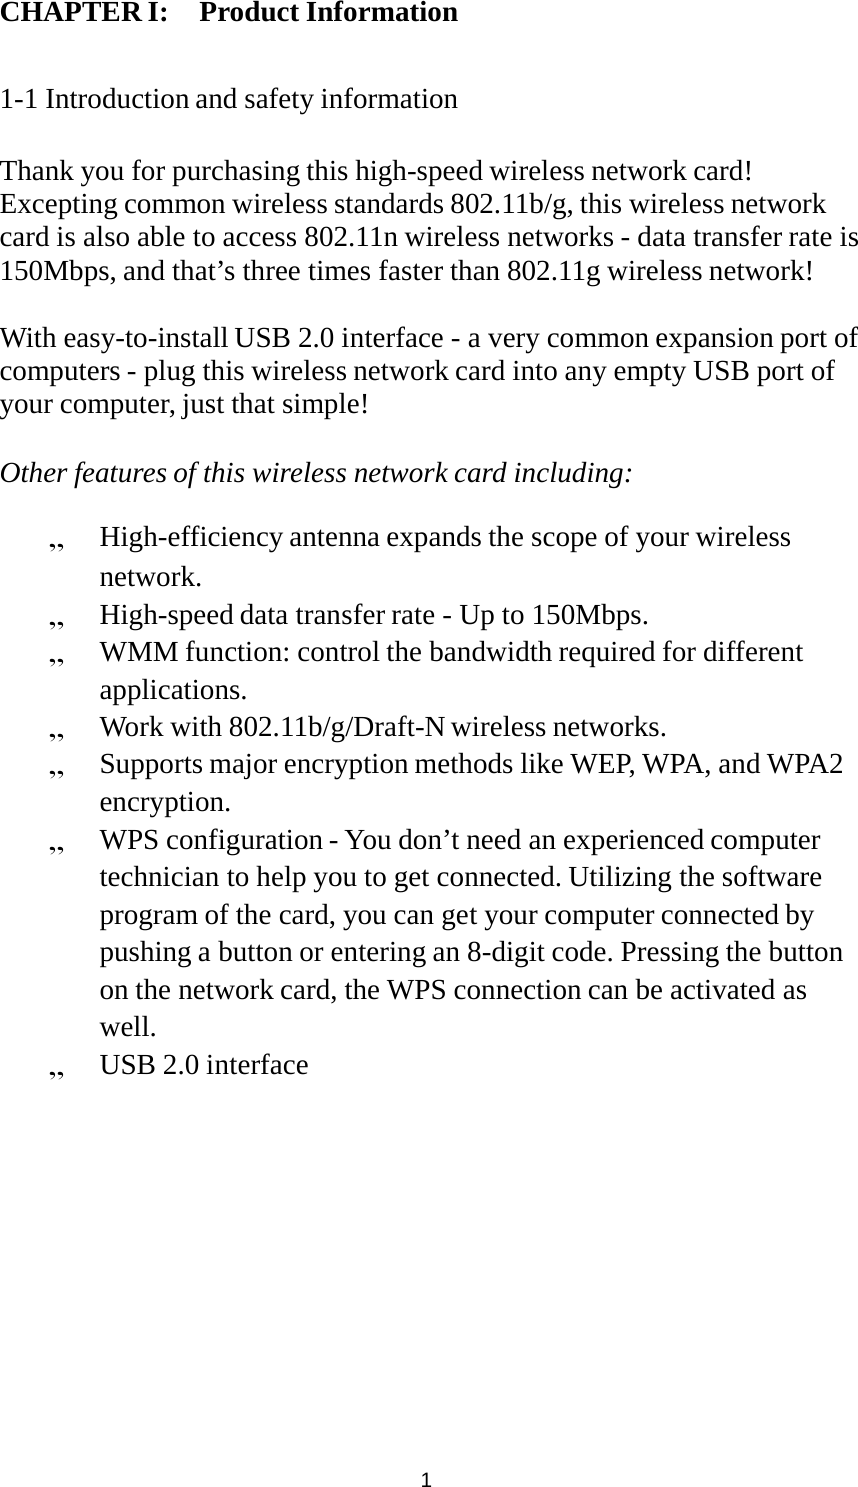 CHAPTER I: Product Information1     1-1 Introduction and safety information   Thank you for purchasing this high-speed wireless network card! Excepting common wireless standards 802.11b/g, this wireless network card is also able to access 802.11n wireless networks - data transfer rate is 150Mbps, and that’s three times faster than 802.11g wireless network!   With easy-to-install USB 2.0 interface - a very common expansion port of computers - plug this wireless network card into any empty USB port of your computer, just that simple!   Other features of this wireless network card including:   High-efficiency antenna expands the scope of your wireless network.  High-speed data transfer rate - Up to 150Mbps.  WMM function: control the bandwidth required for different applications.  Work with 802.11b/g/Draft-N wireless networks.  Supports major encryption methods like WEP, WPA, and WPA2 encryption.  WPS configuration - You don’t need an experienced computer technician to help you to get connected. Utilizing the software program of the card, you can get your computer connected by pushing a button or entering an 8-digit code. Pressing the button on the network card, the WPS connection can be activated as well.  USB 2.0 interface  